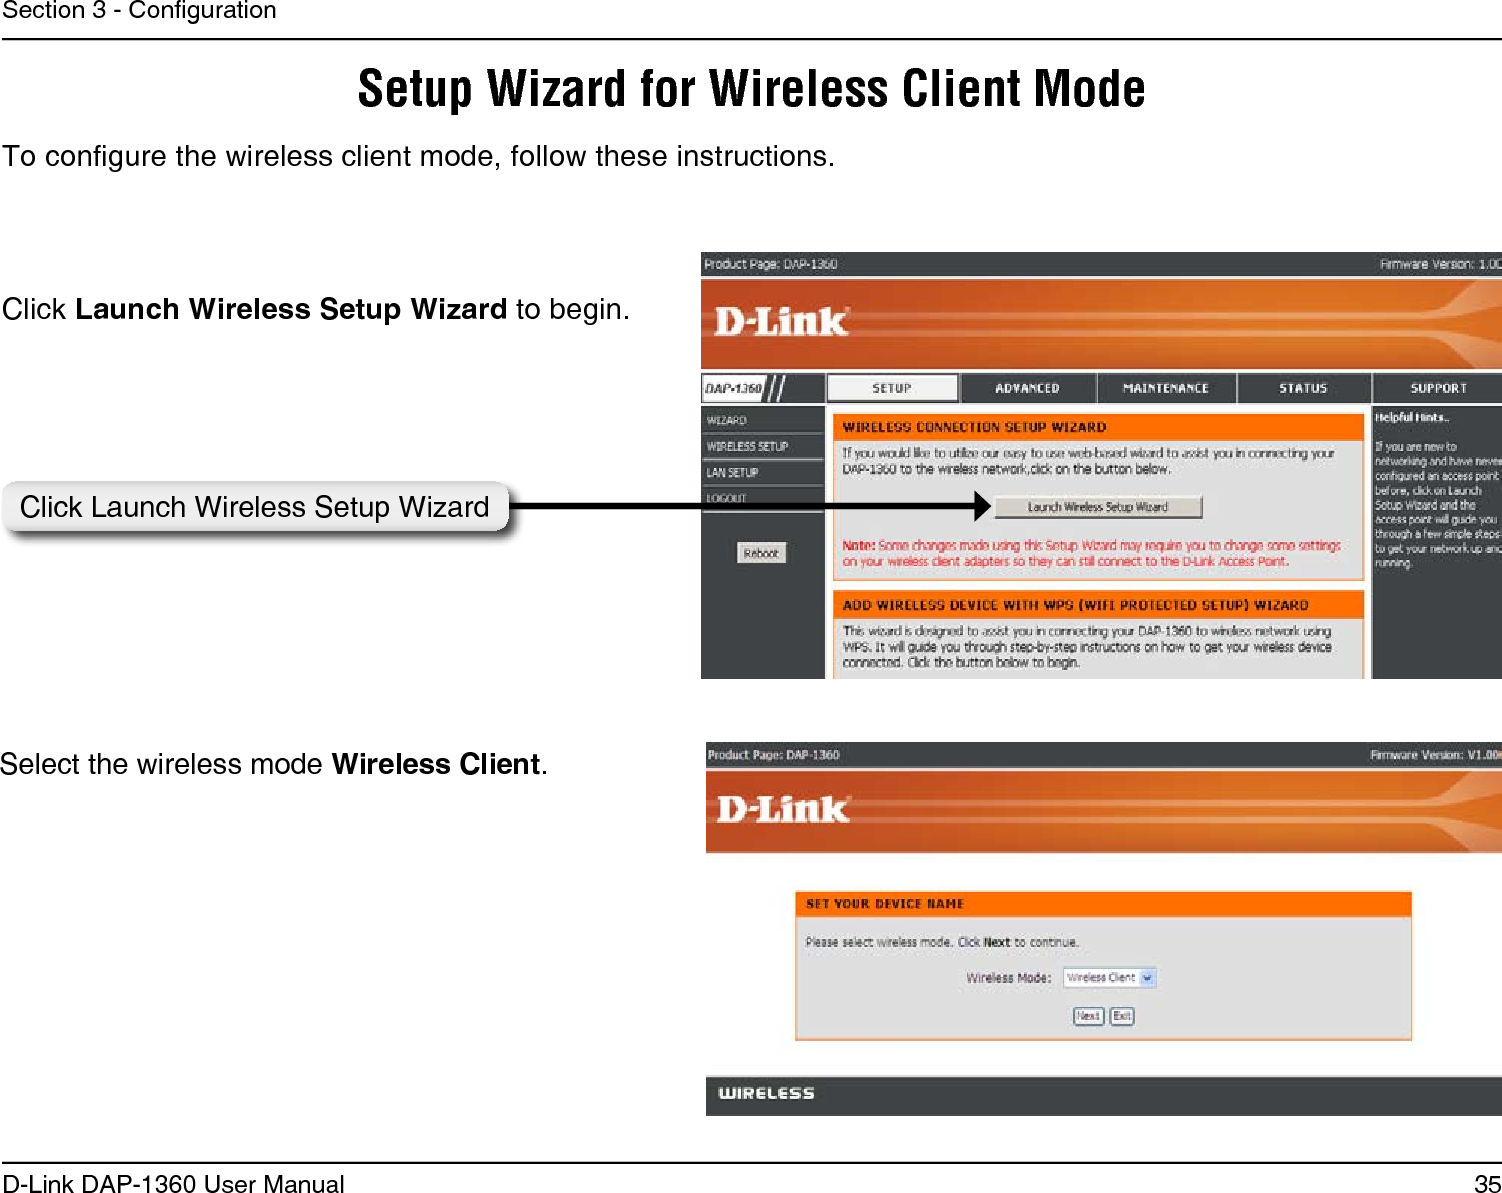 35D-Link DAP-1360 User ManualSection 3 - CongurationTo congure the wireless client mode, follow these instructions. Click Launch Wireless Setup Wizard to begin.Setup Wizard for Wireless Client ModeSelect the wireless mode Wireless Client.Click Launch Wireless Setup Wizard